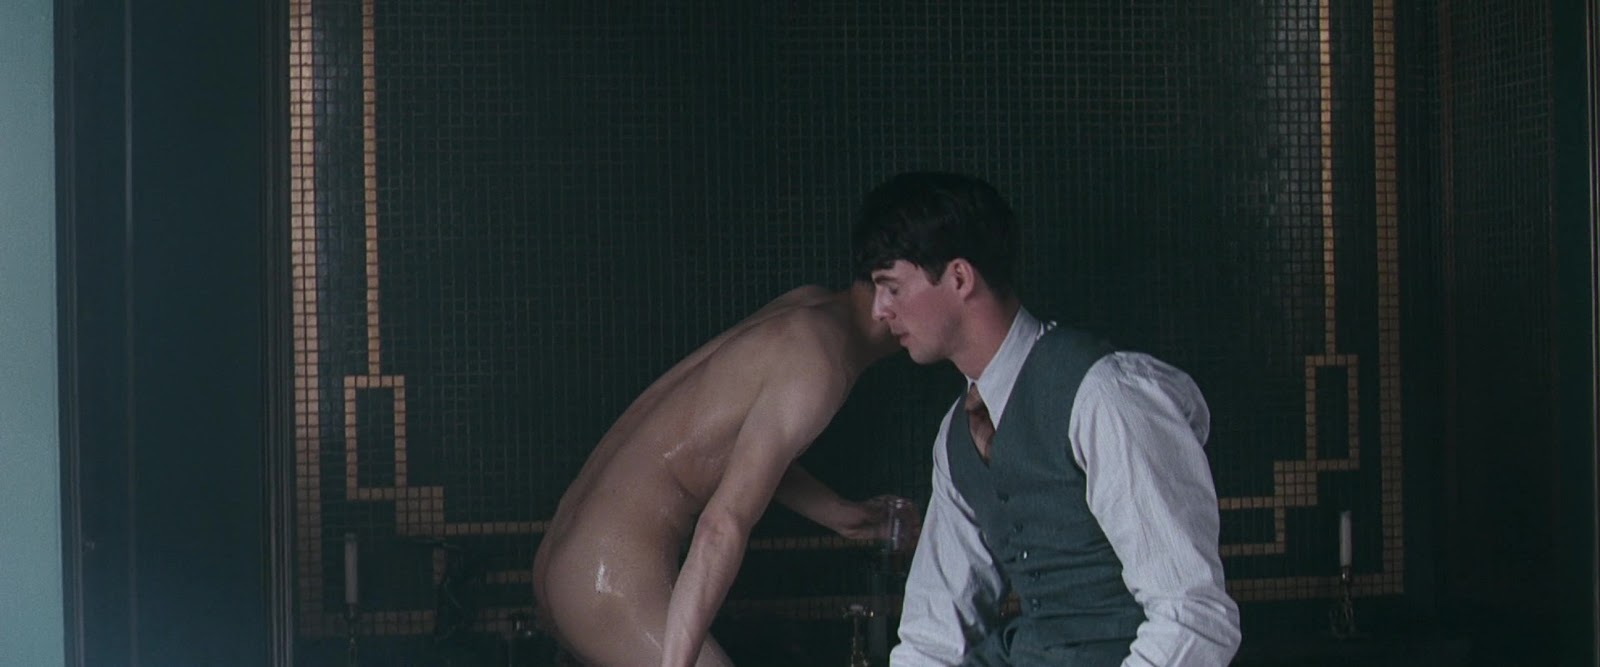 Ben Whishaw nude in Brideshead Revisited.